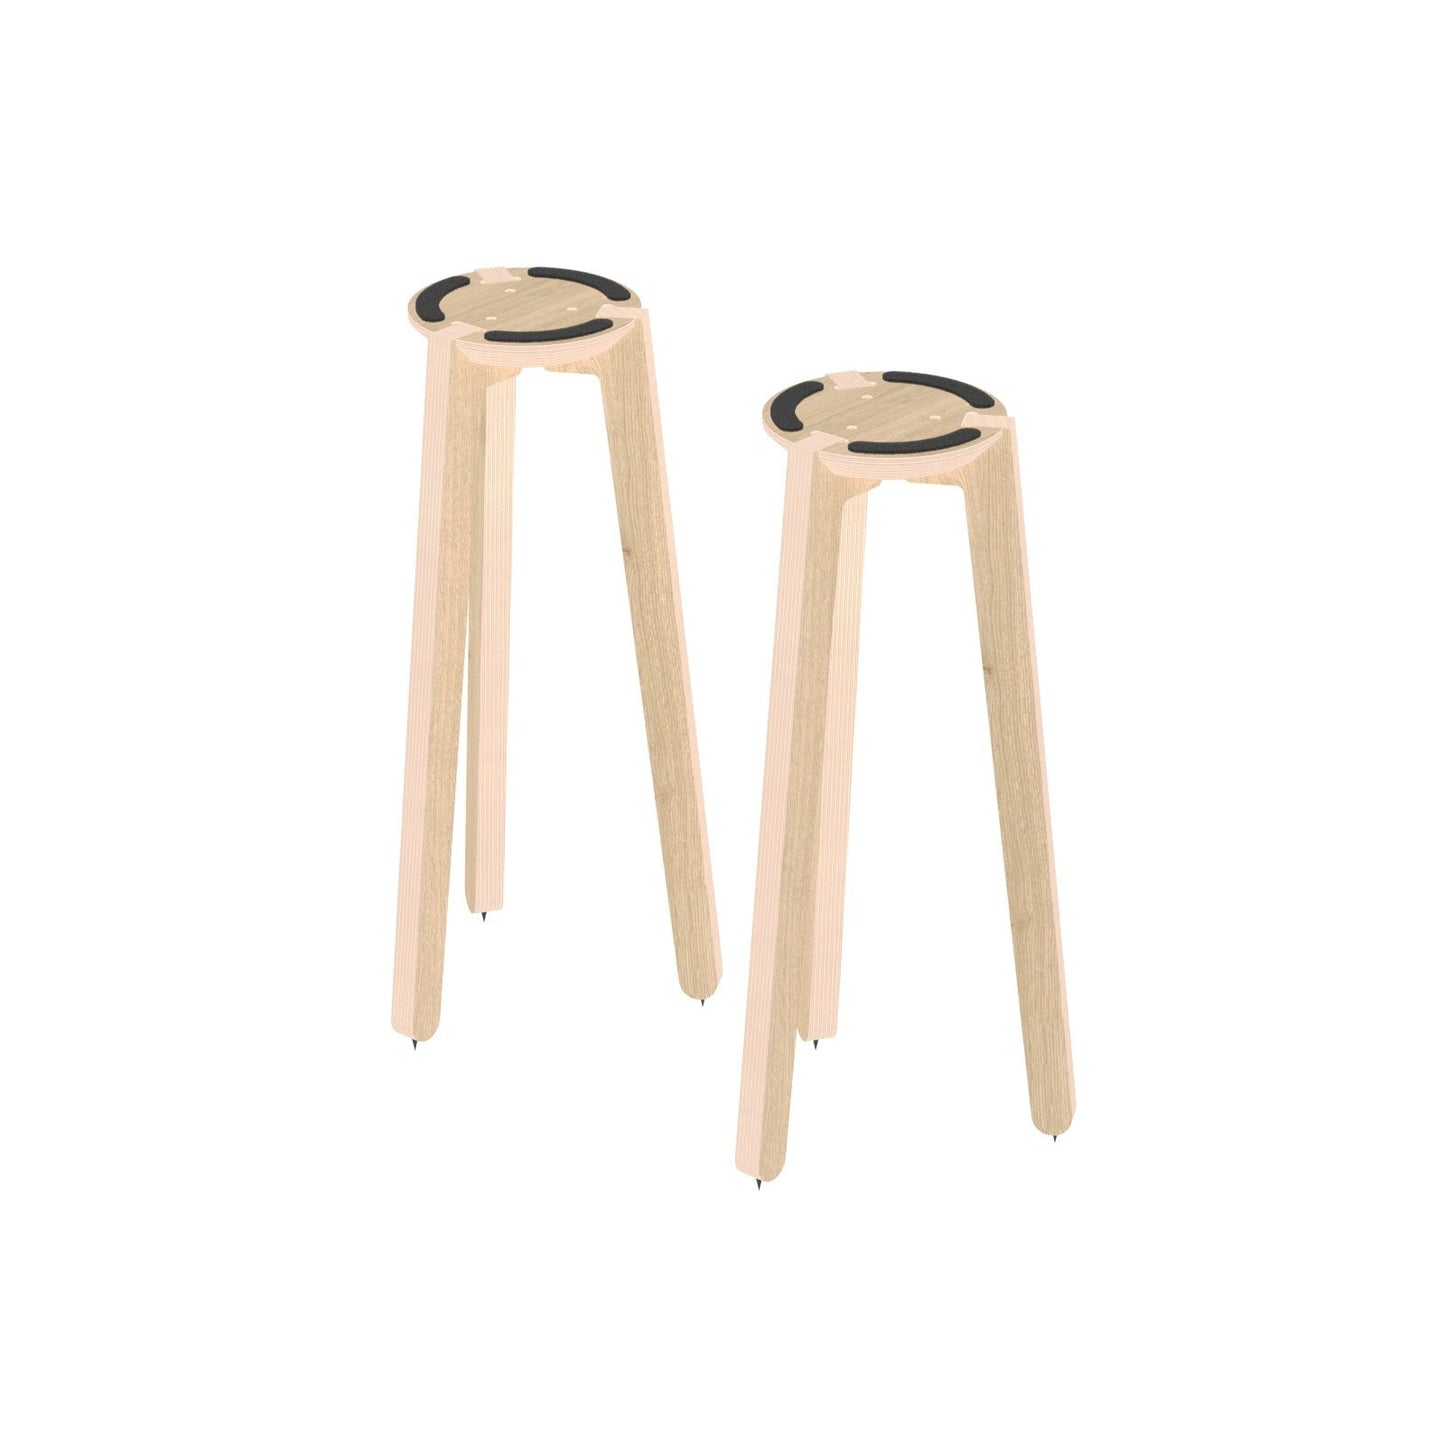 HABIB/CO - Tripod Speaker Stand Pair (natural) - 24" height - 7.5" base - Carpet Spikes : None